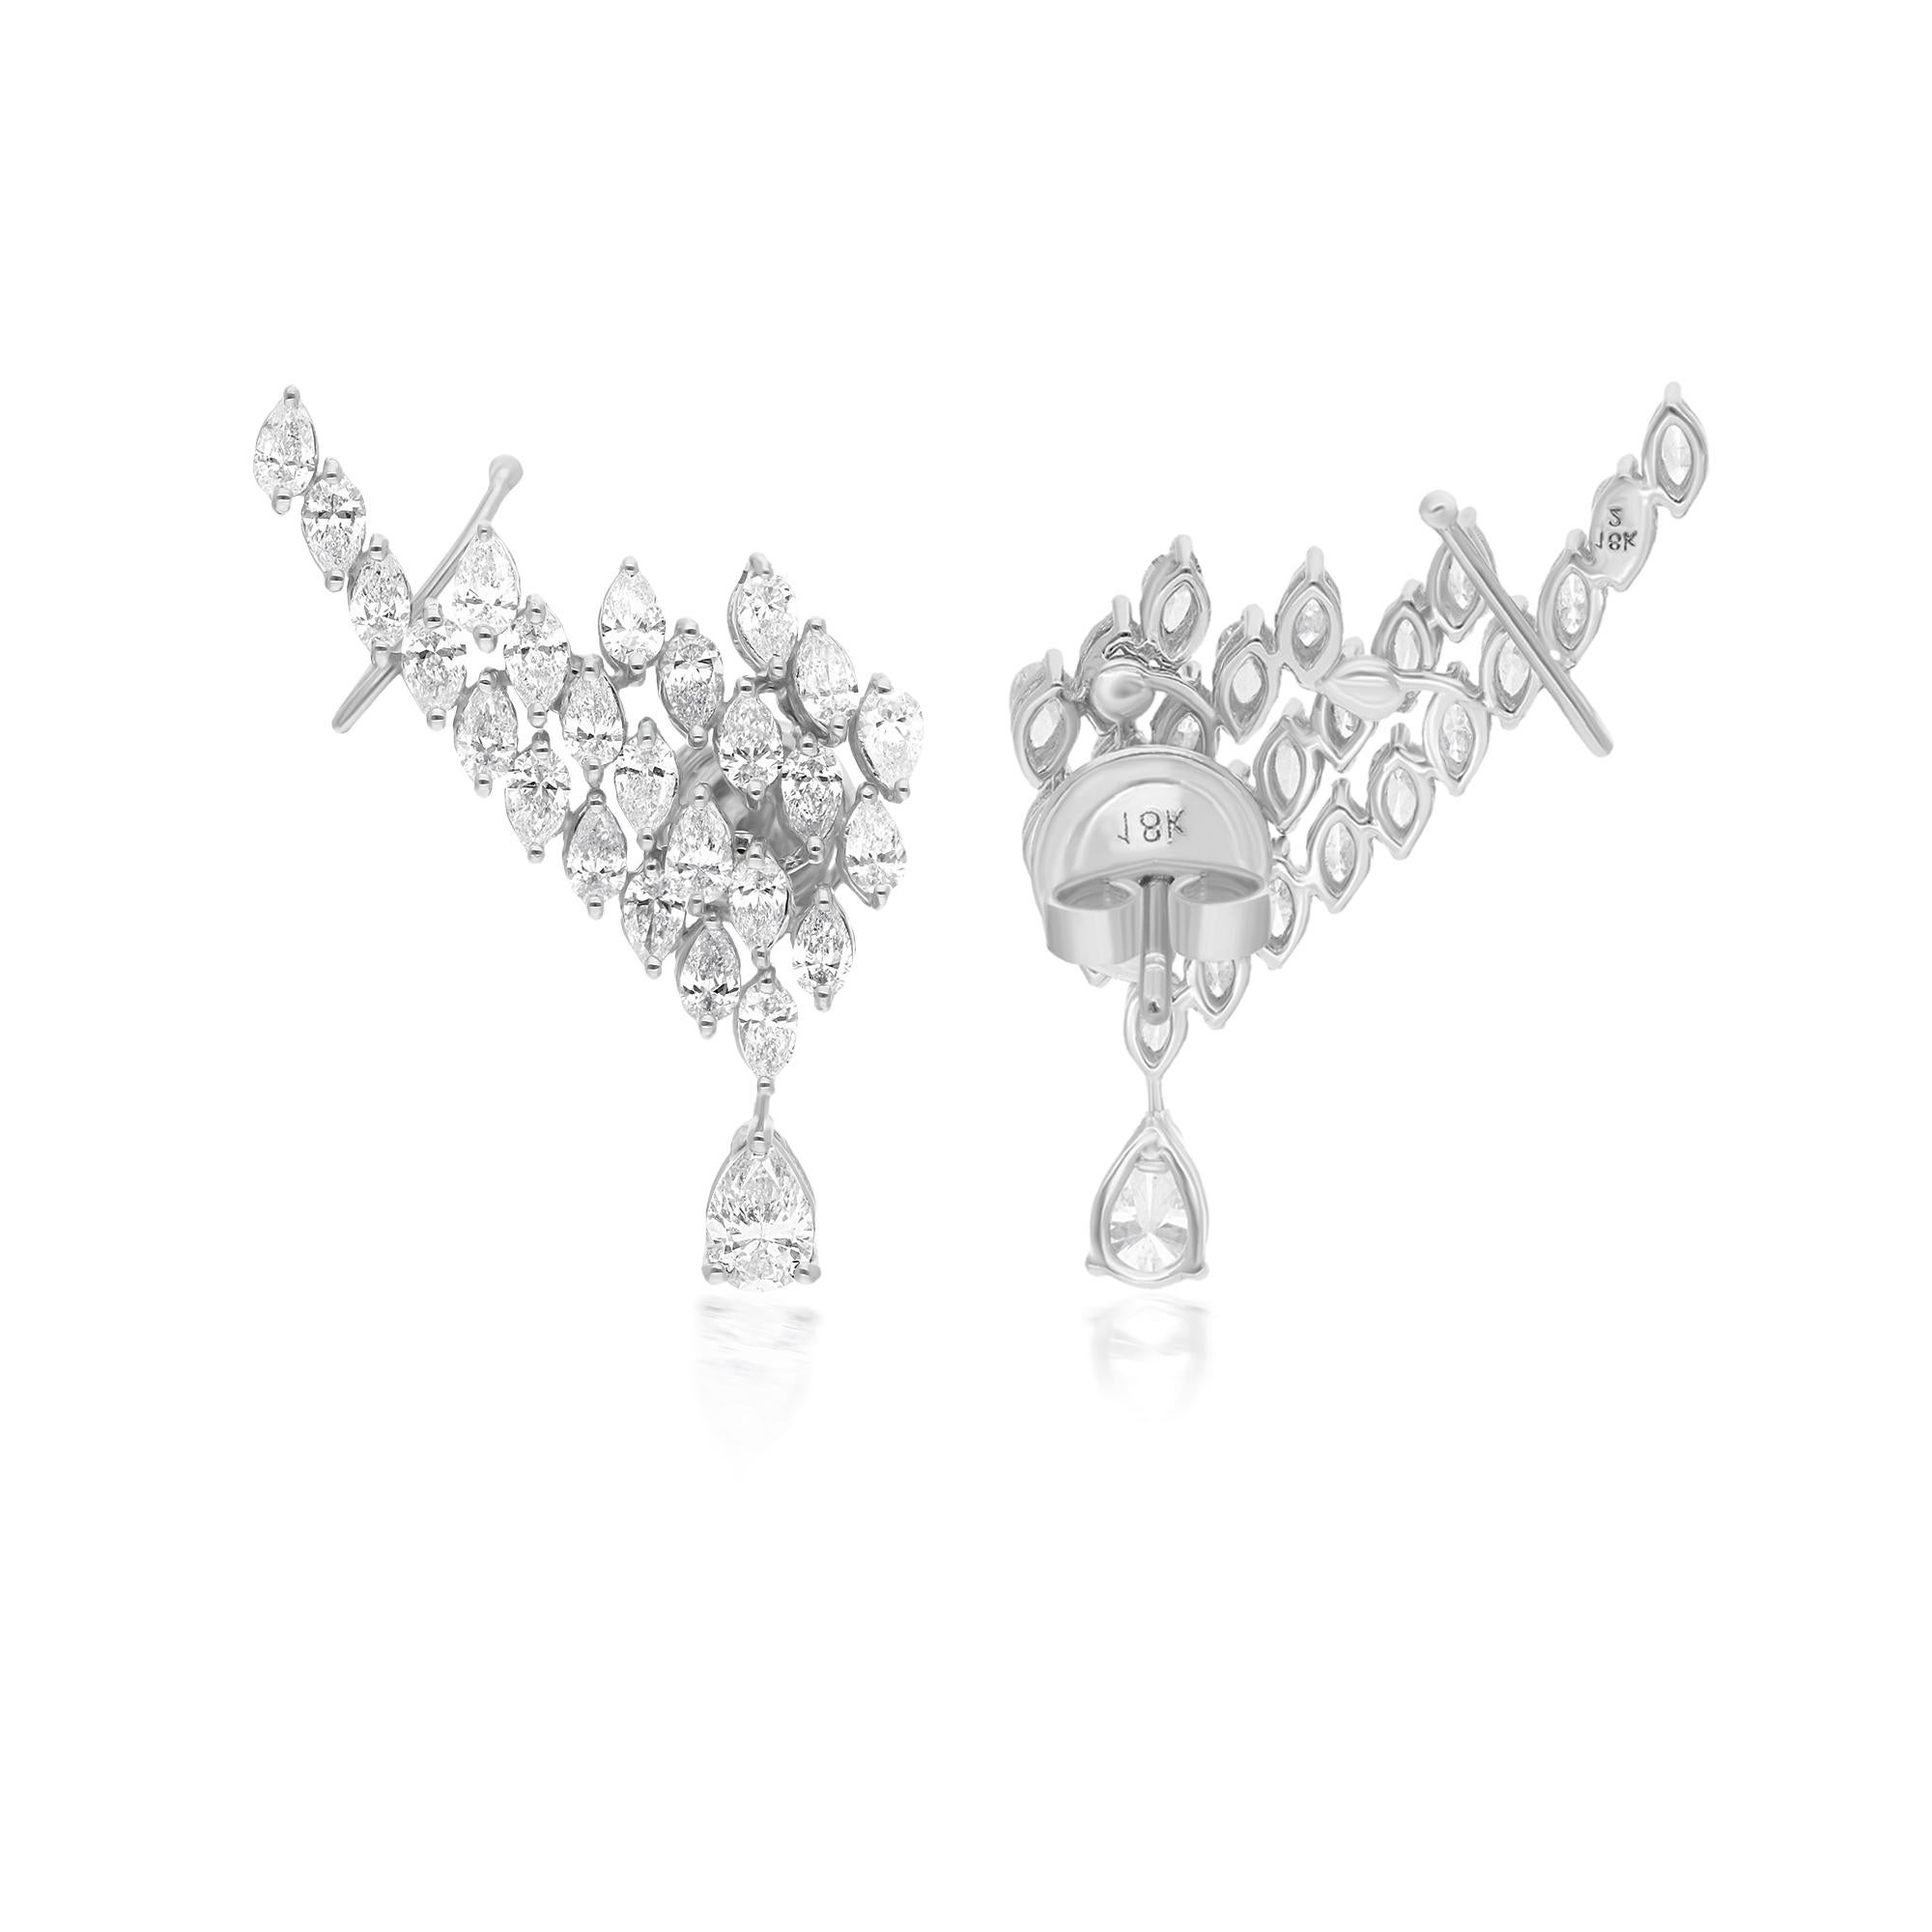 Introducing our exquisite 3.36 Carat Marquise & Pear Diamond Ear Cuff Earrings, crafted with unparalleled artistry in luxurious 18 Karat White Gold. These earrings are a testament to timeless elegance and contemporary sophistication, designed to